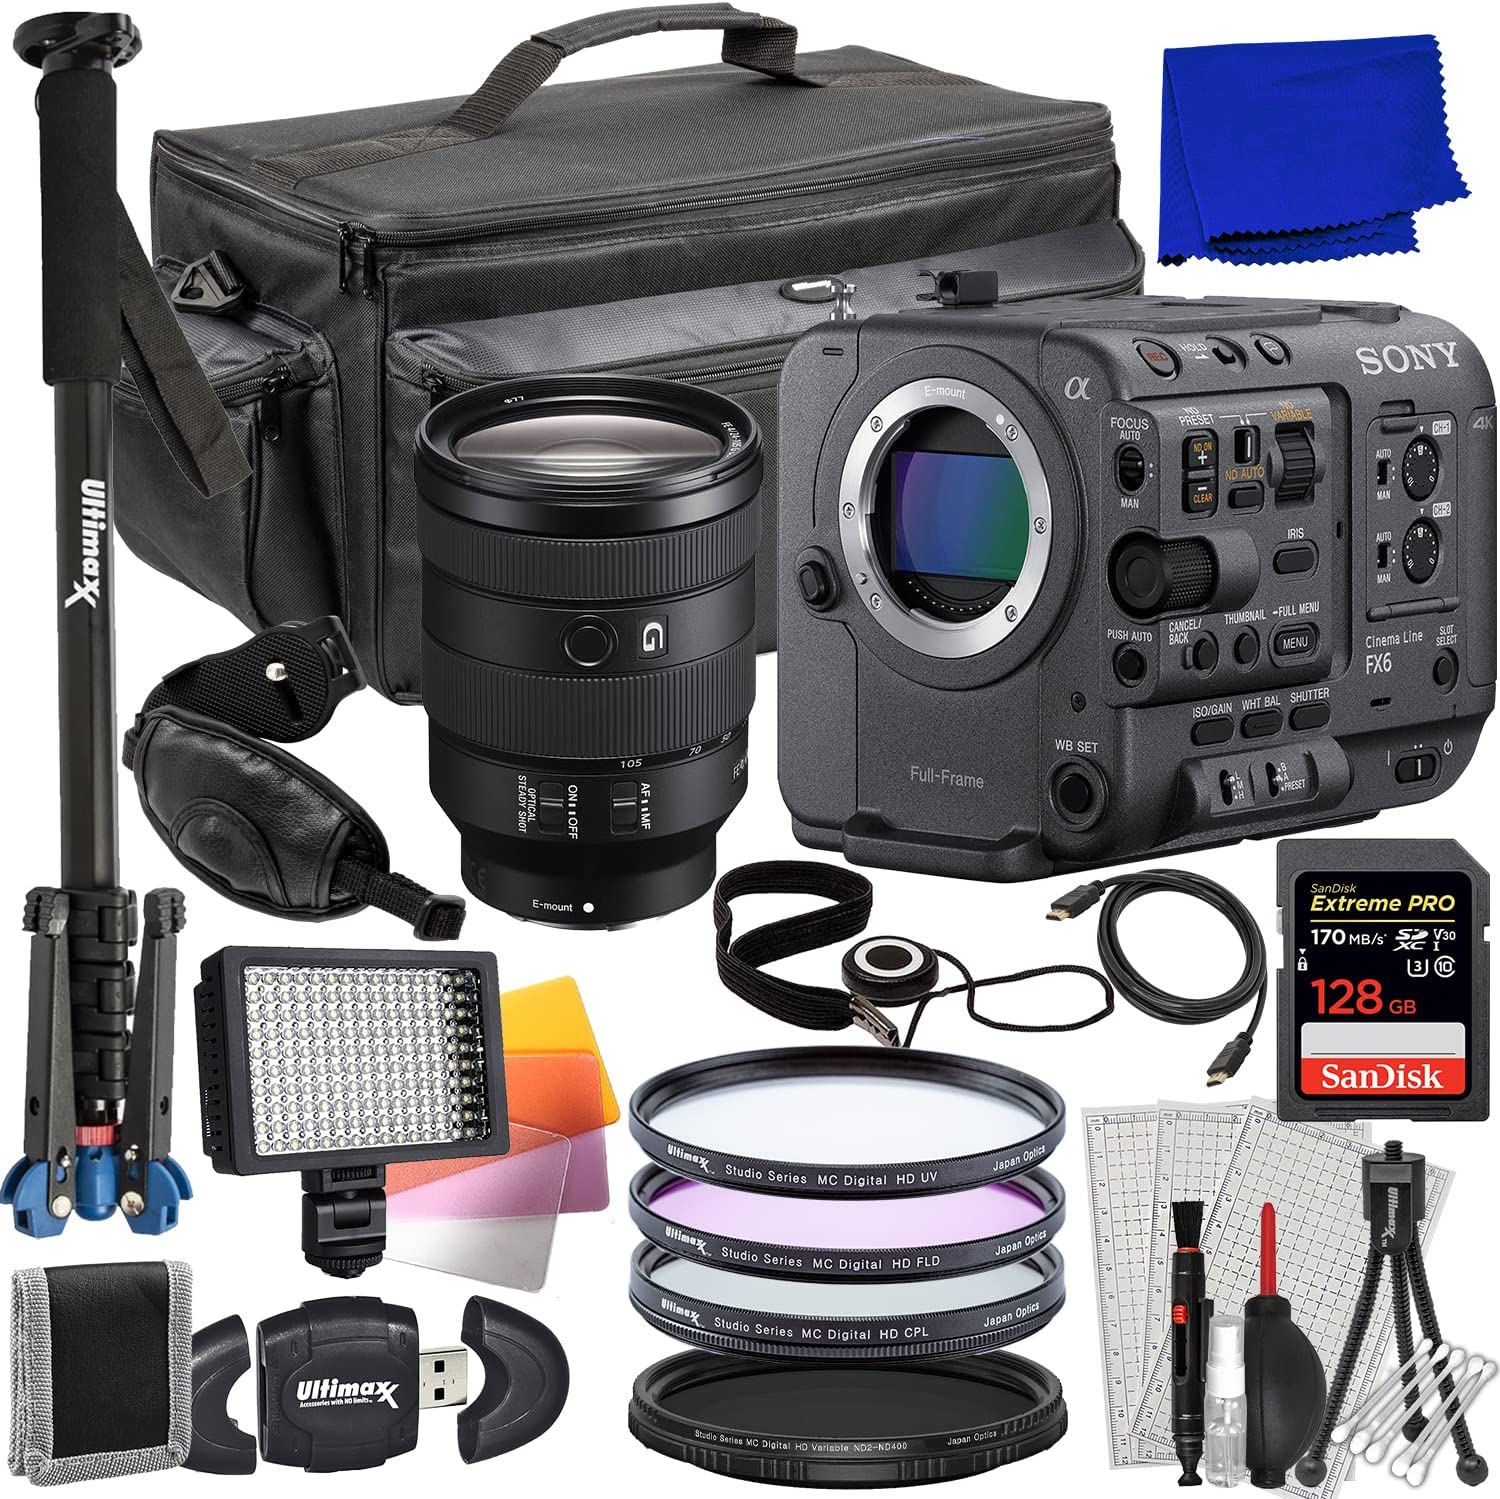 Sony FX6 Digital Cinema Camera Kit with 24-105mm Lens + SanDisk 128GB Extreme Pro Memory Card, 160 LED Video Light, Deluxe 62” Monopod & Much More (35pc Bundle)